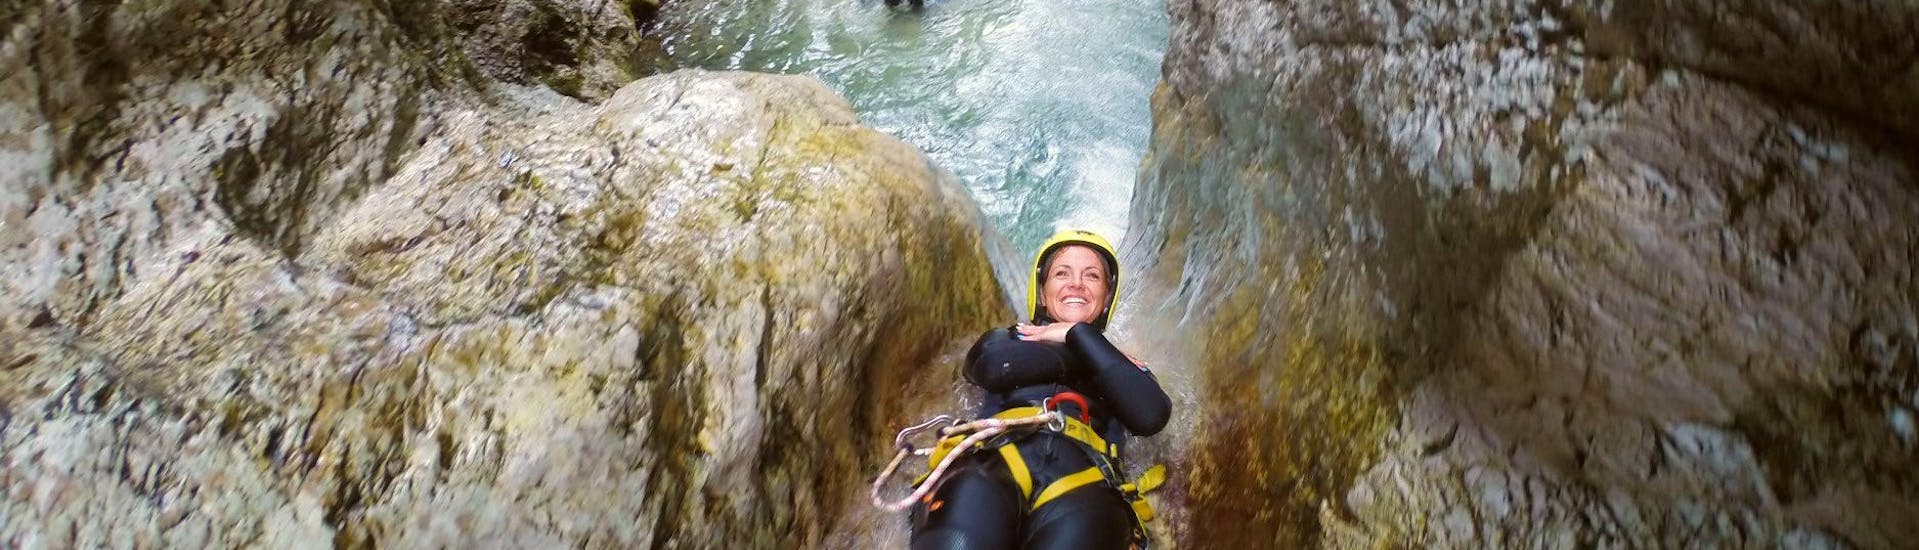 An extraordinary experience during the Canyoning in the Sušec Gorge for Groups (from 8 people) with TOP Rafting Centre Bovec.